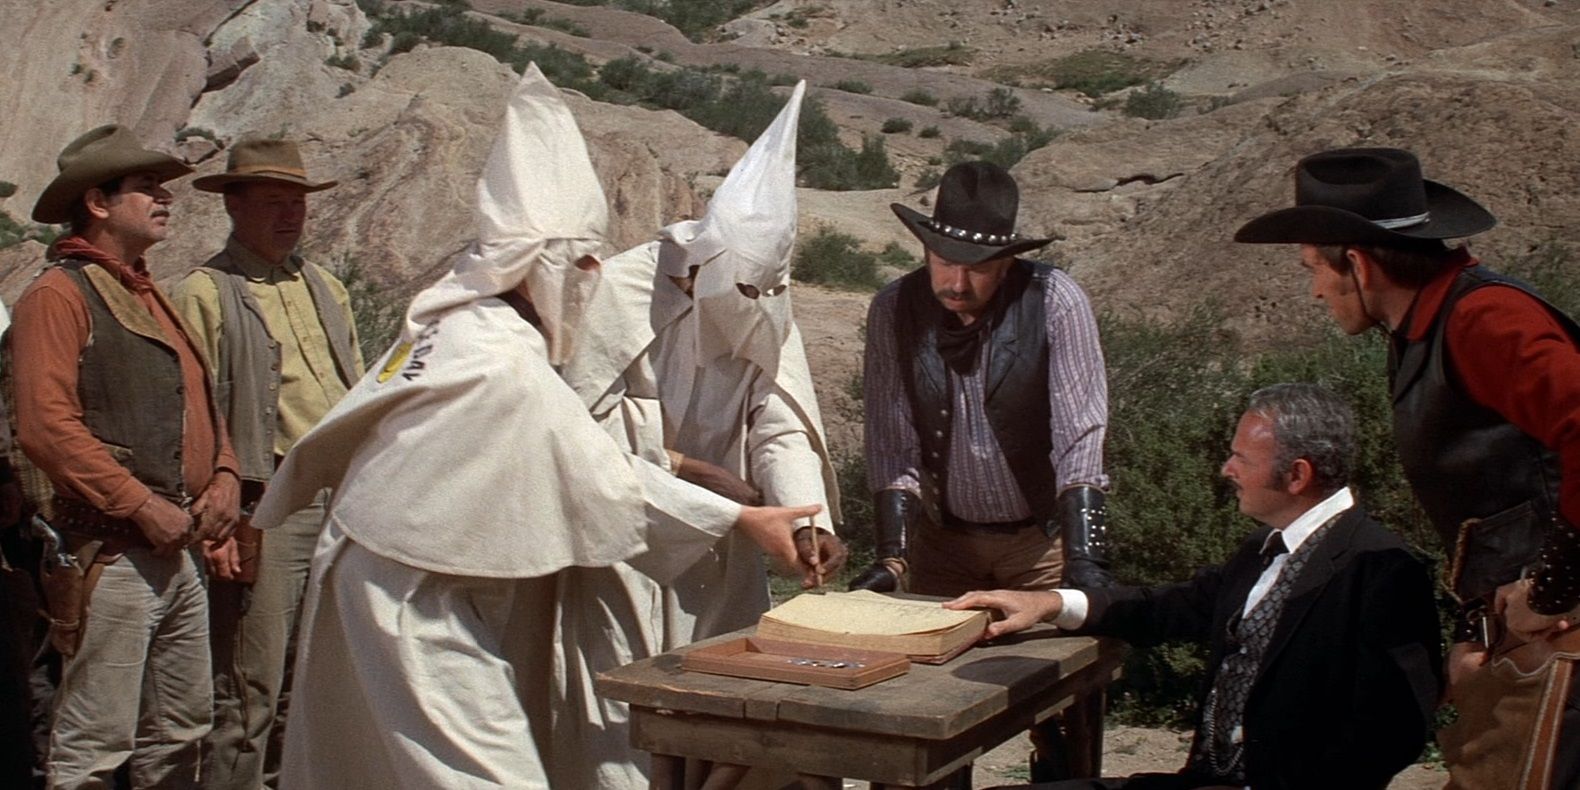 The villains' sign-up sheet in Blazing Saddles